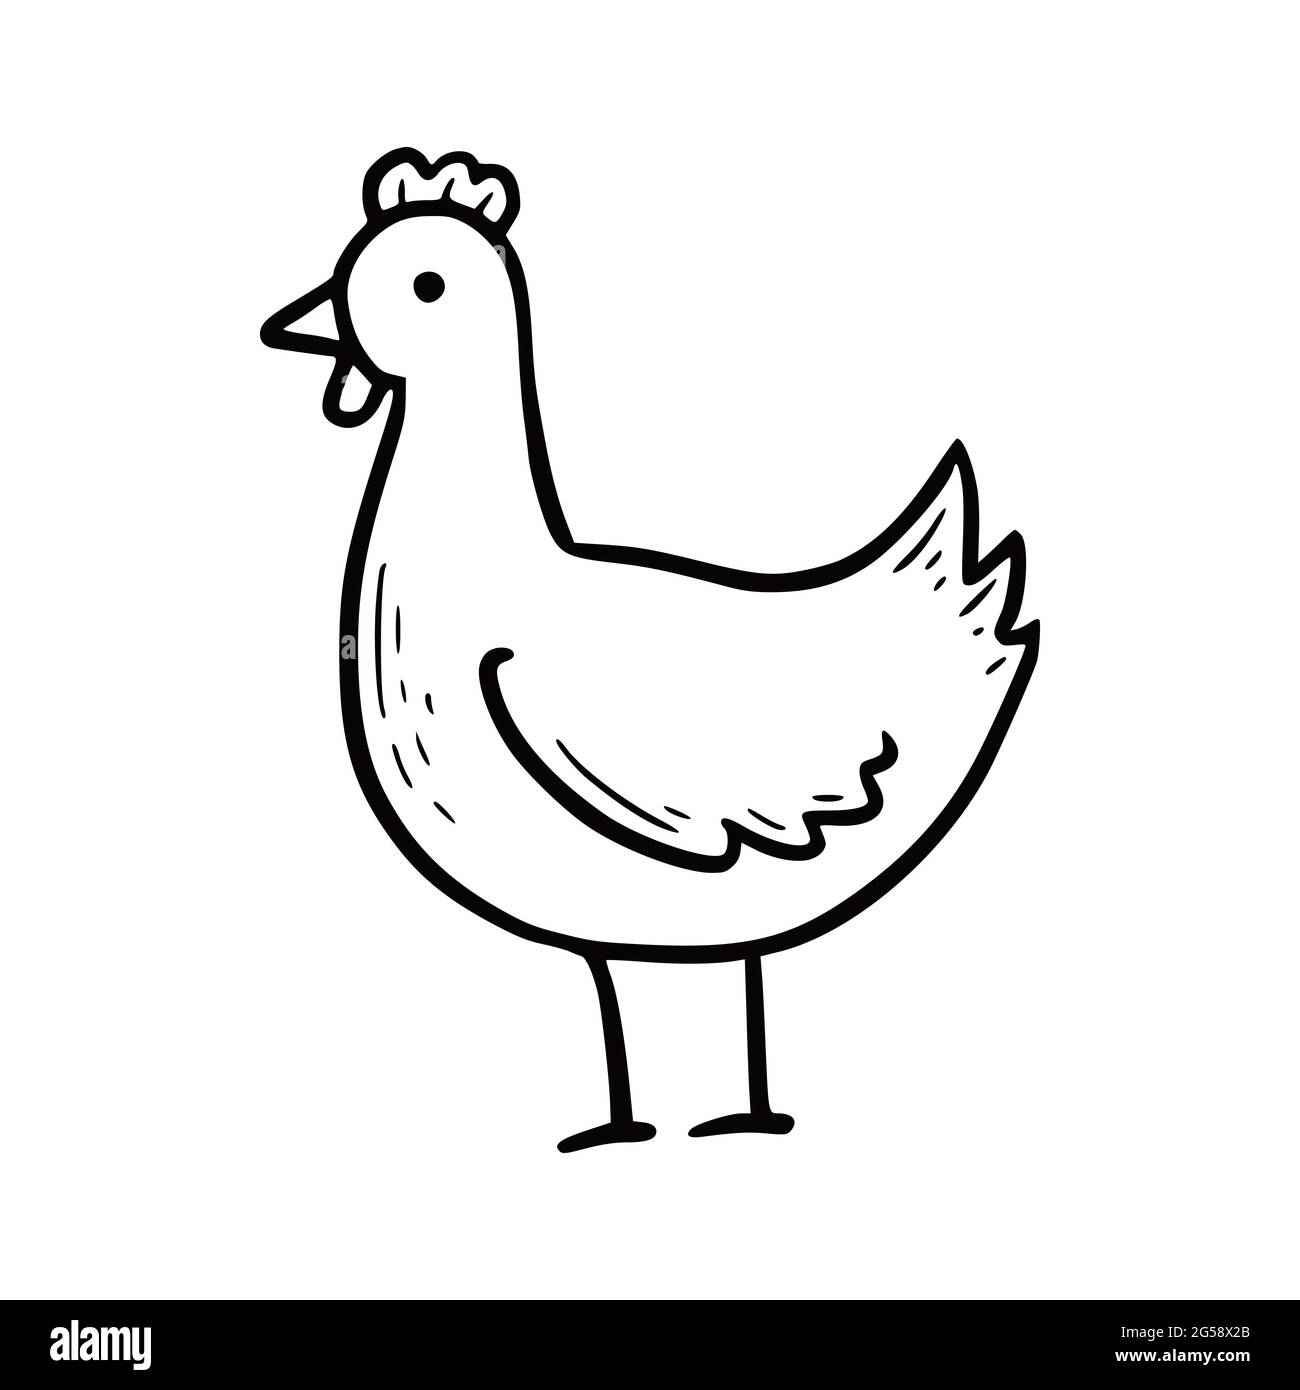 Chicken drawing Black and White Stock Photos & Images - Alamy